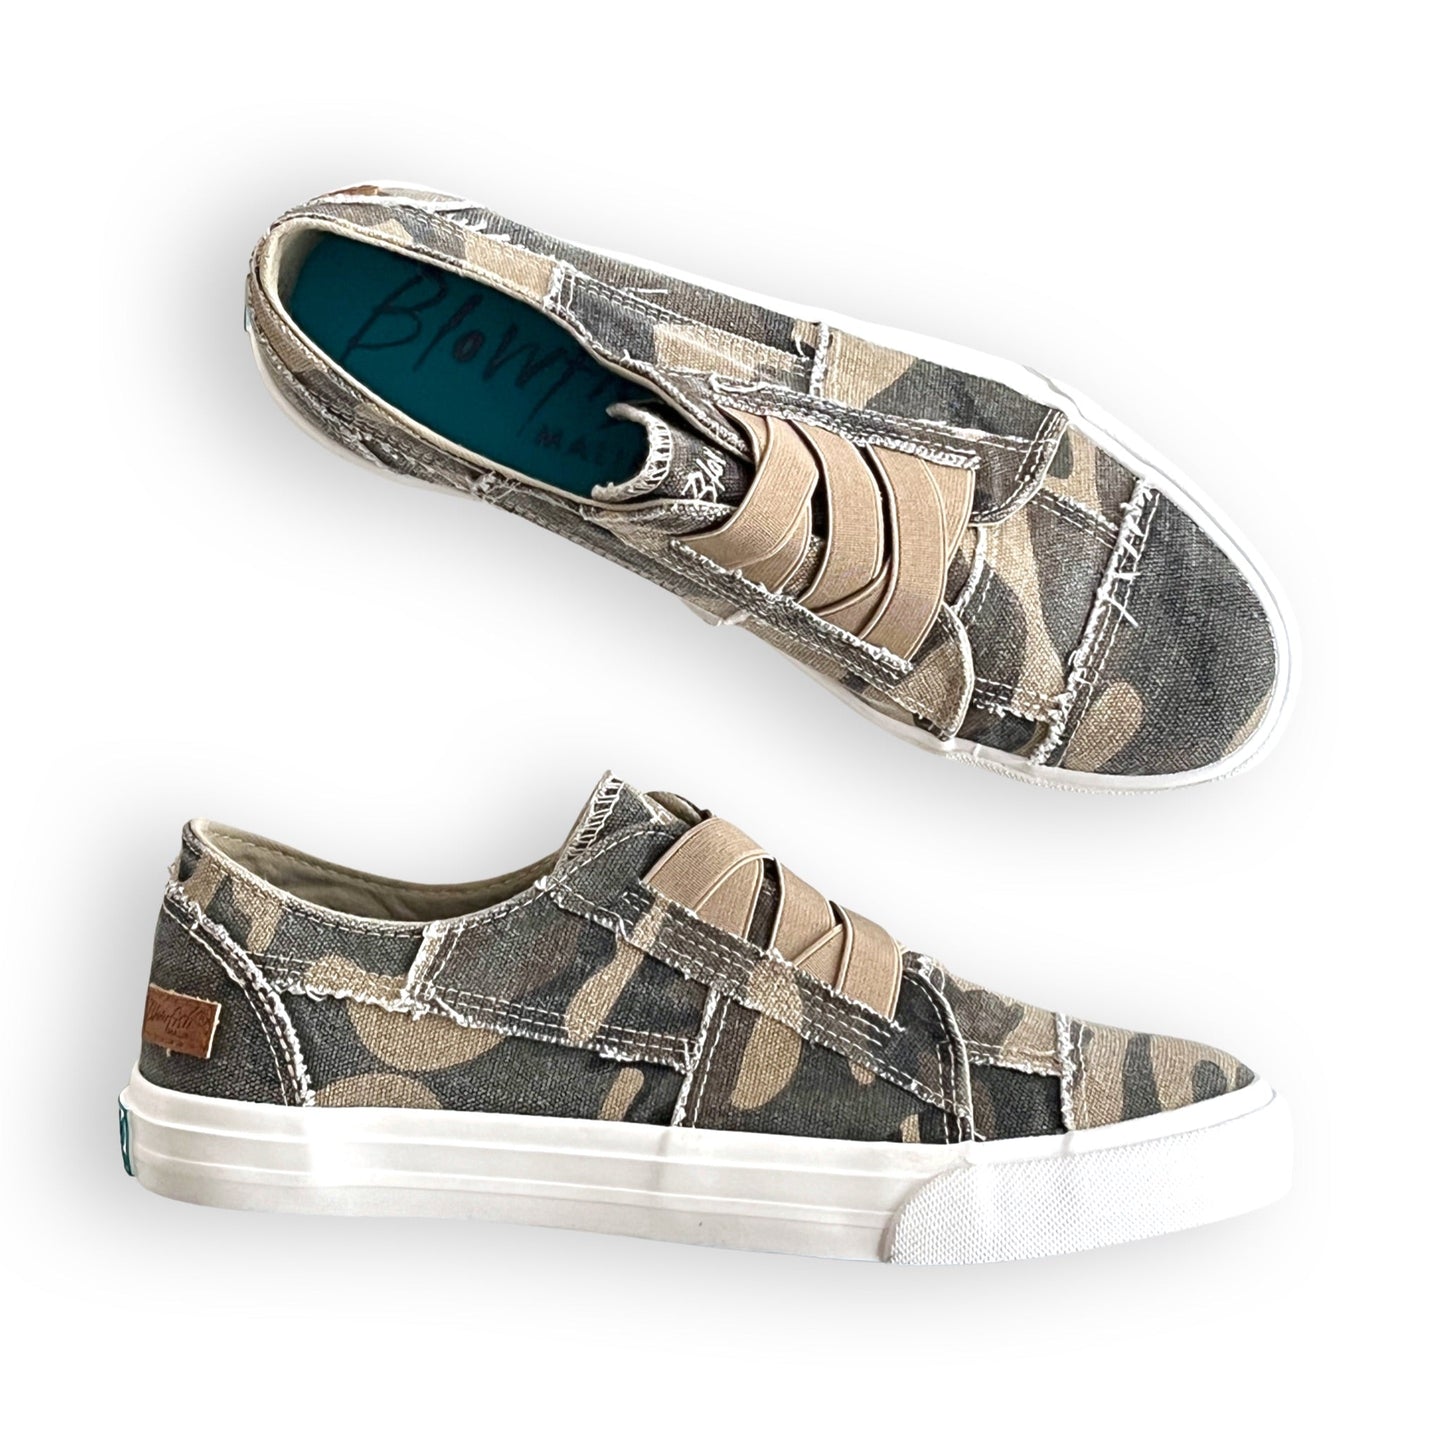 Marley Sneaker in Natural Camo